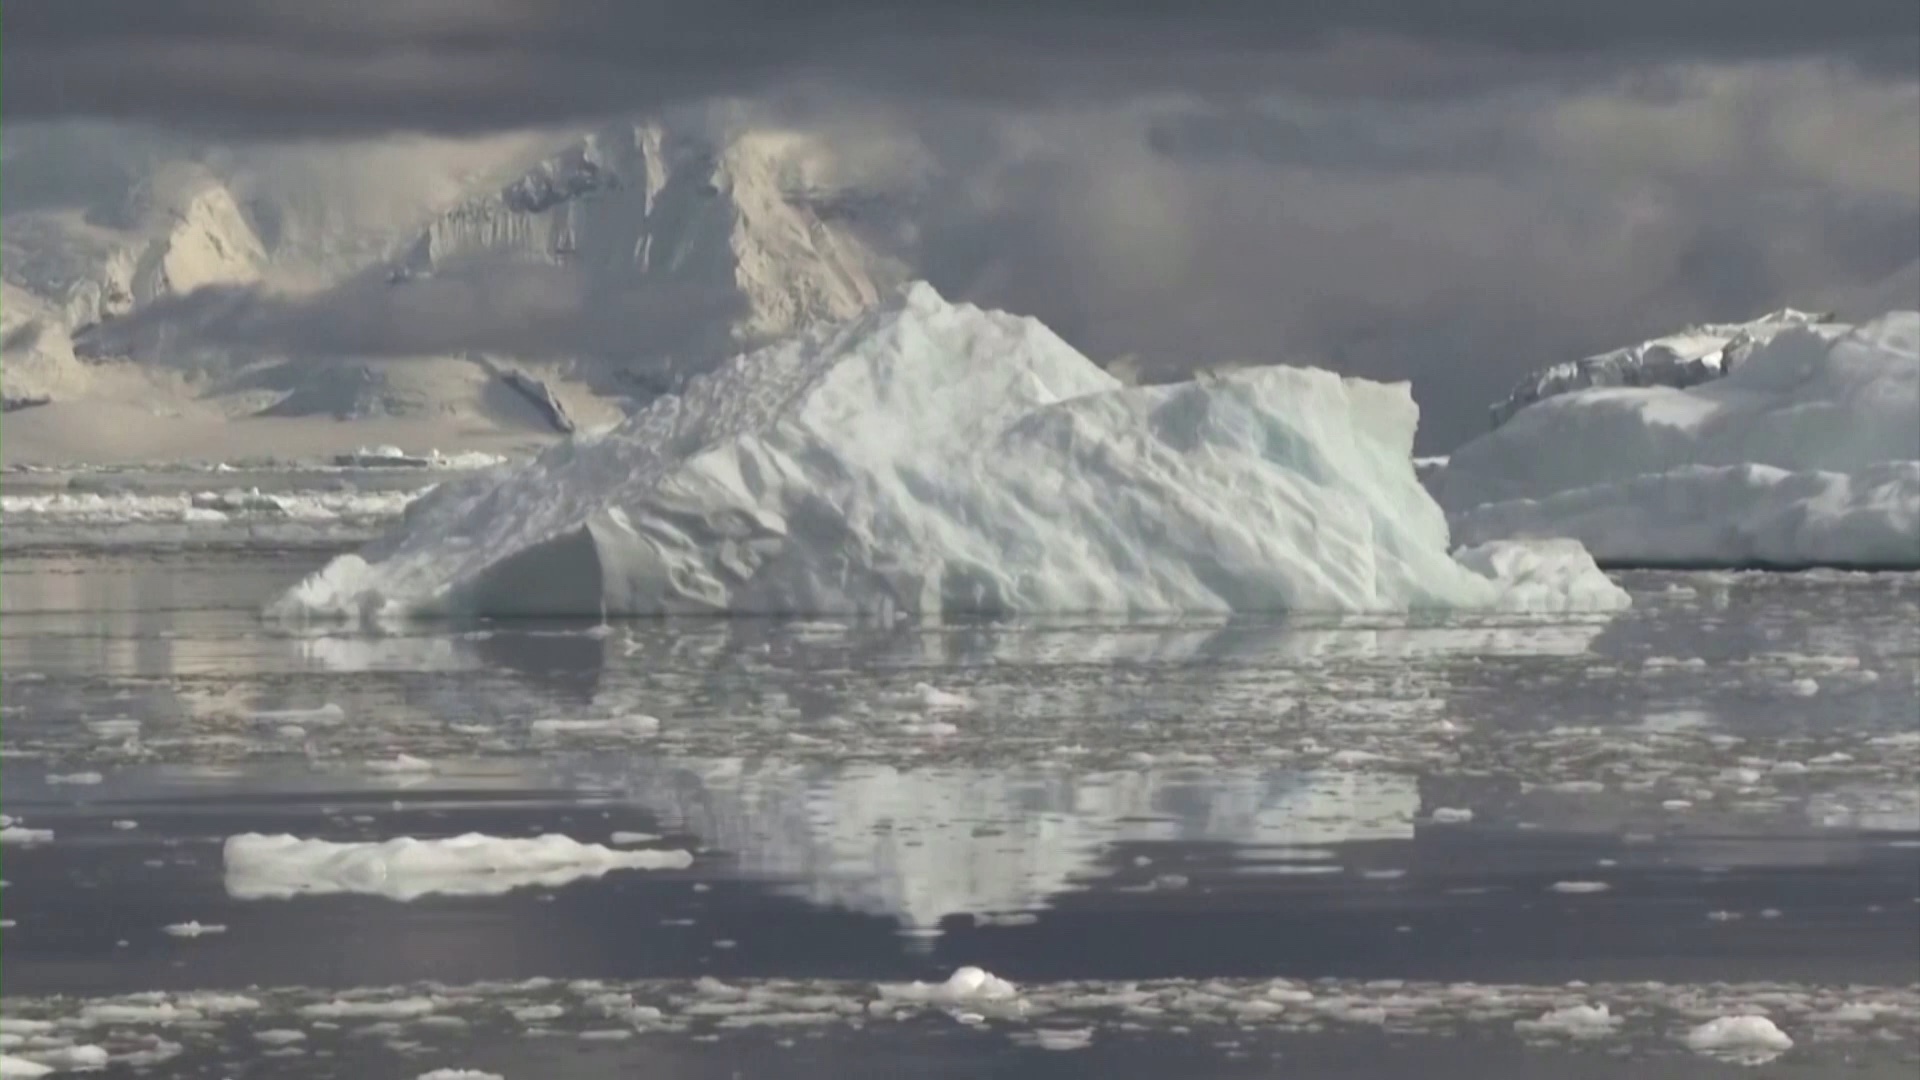 The melting of sea ice has a profound and worsening effect on global climate. /Reuters